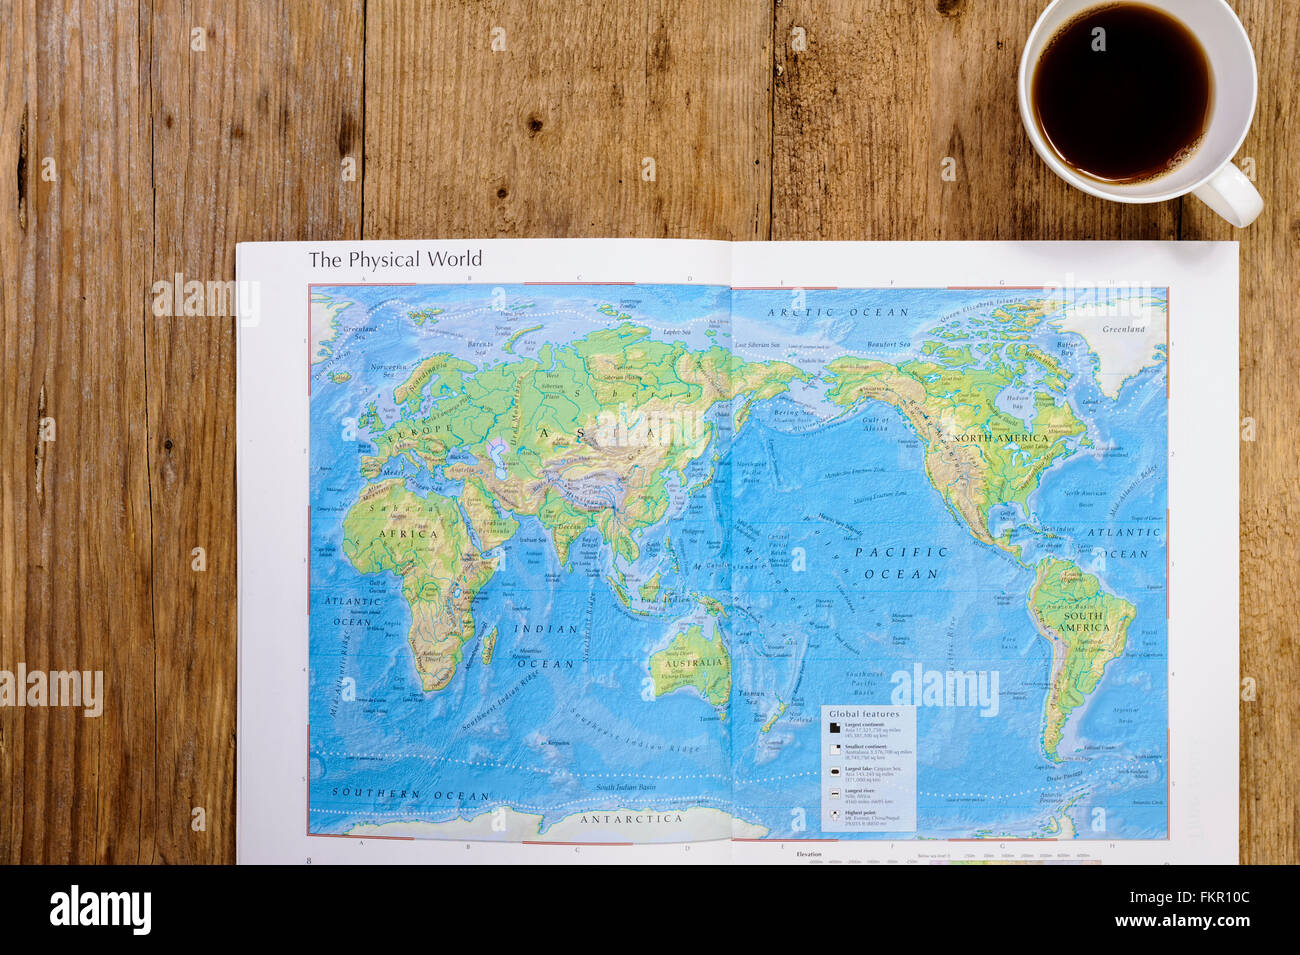 Planning a holiday, with world map, atlas. Stock Photo